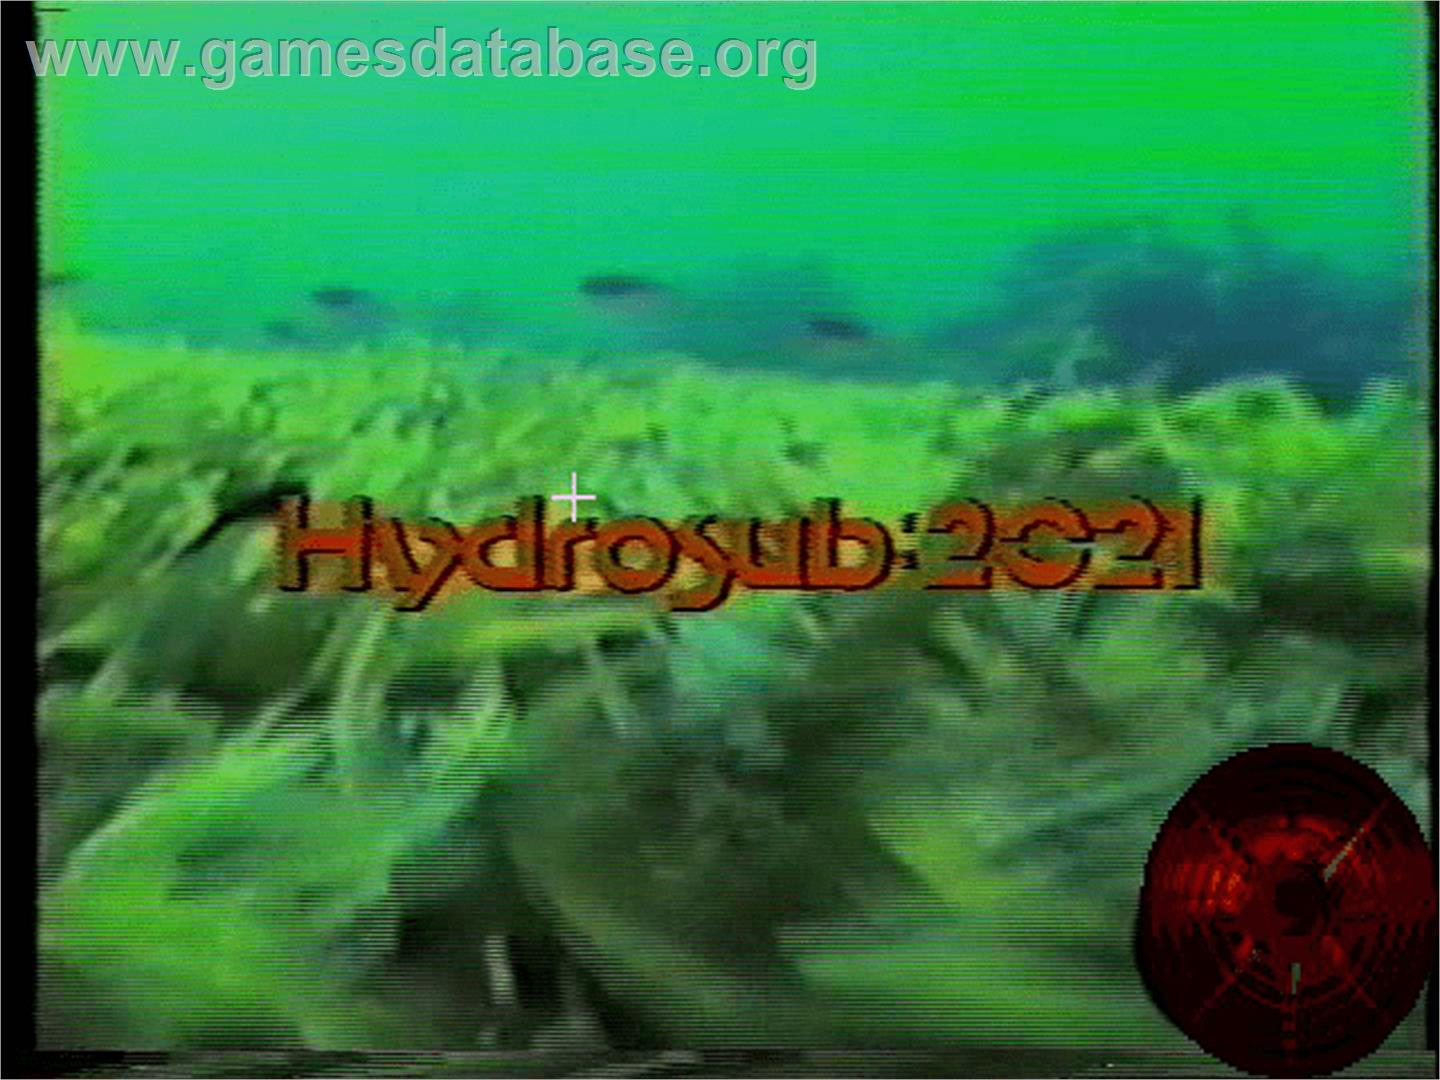 Hydrosub: 2021 - WoW Action Max - Artwork - Title Screen